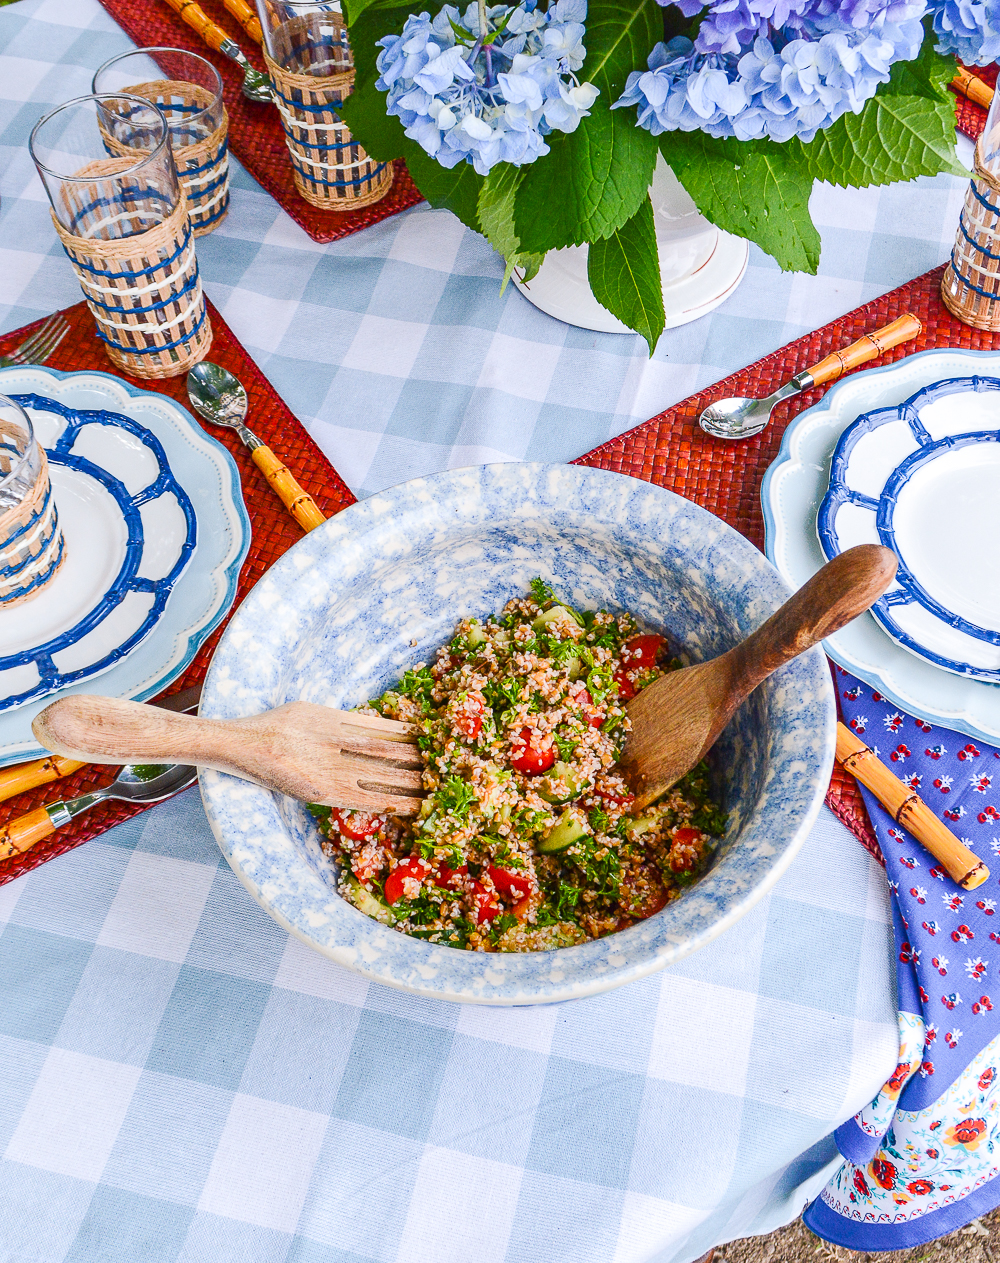 Tabbouleh is the perfect summer side dish for hot weather and dining out of doors